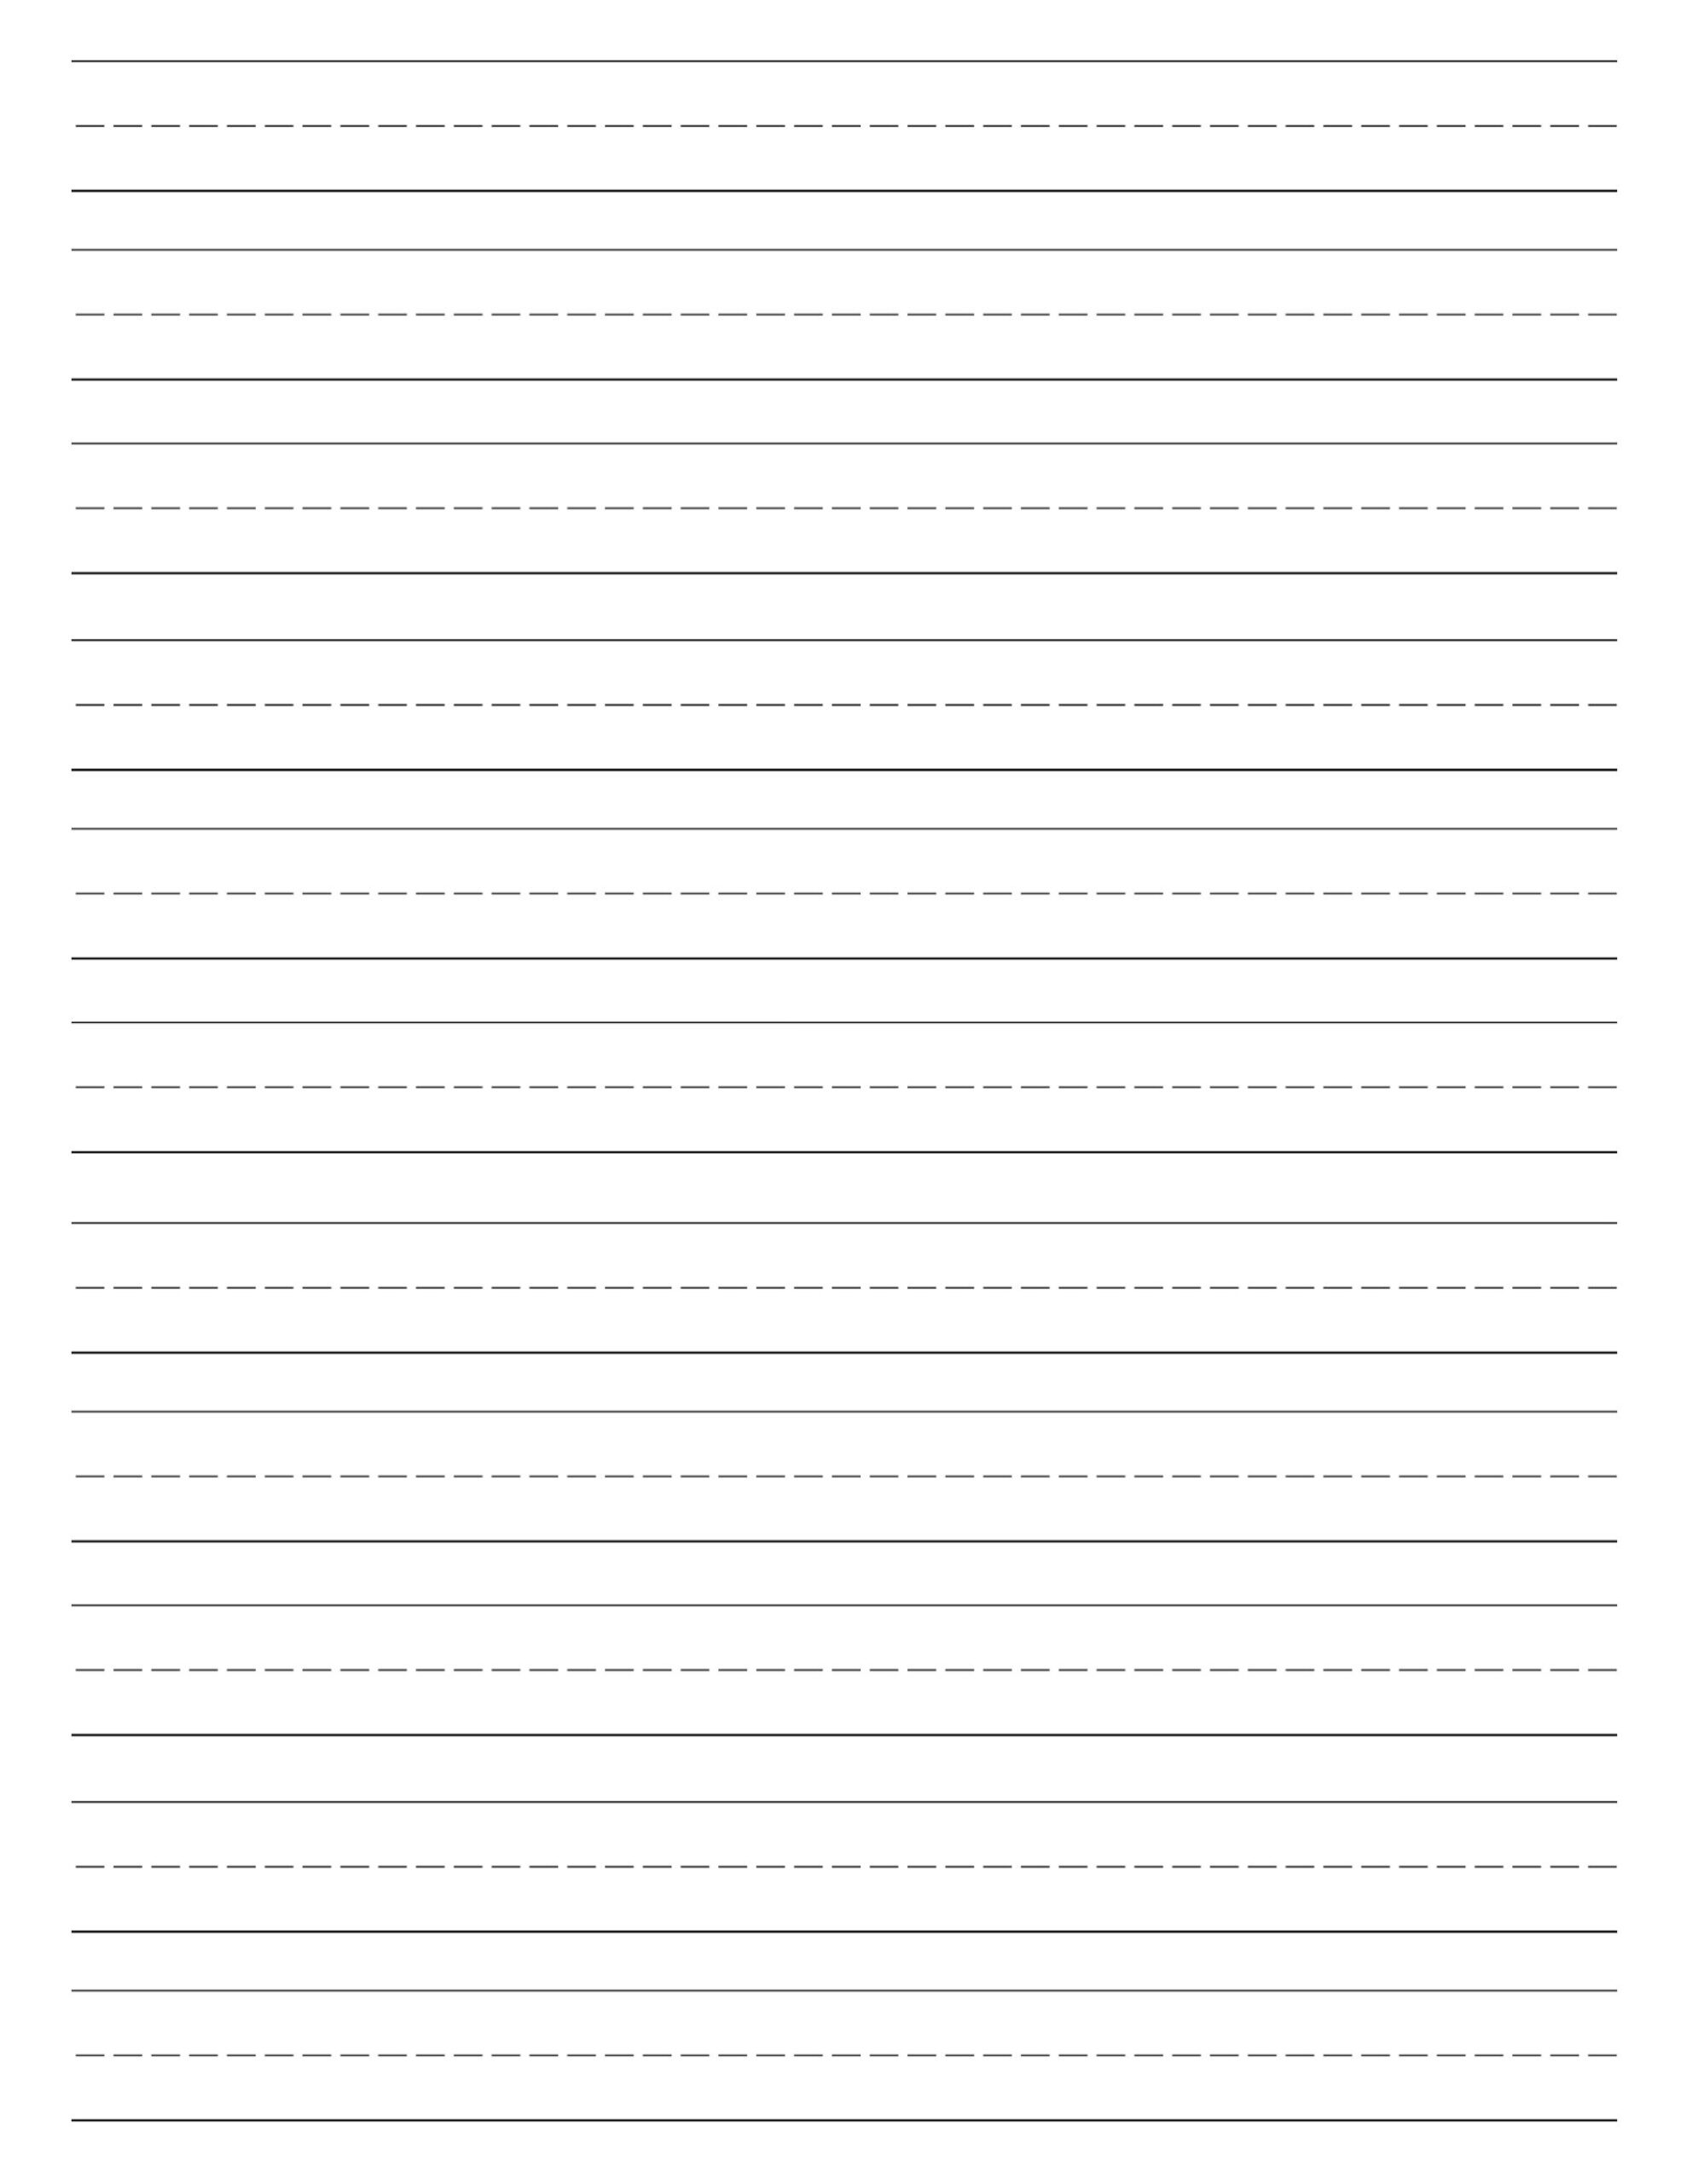 Writing Paper Lined Printable Free